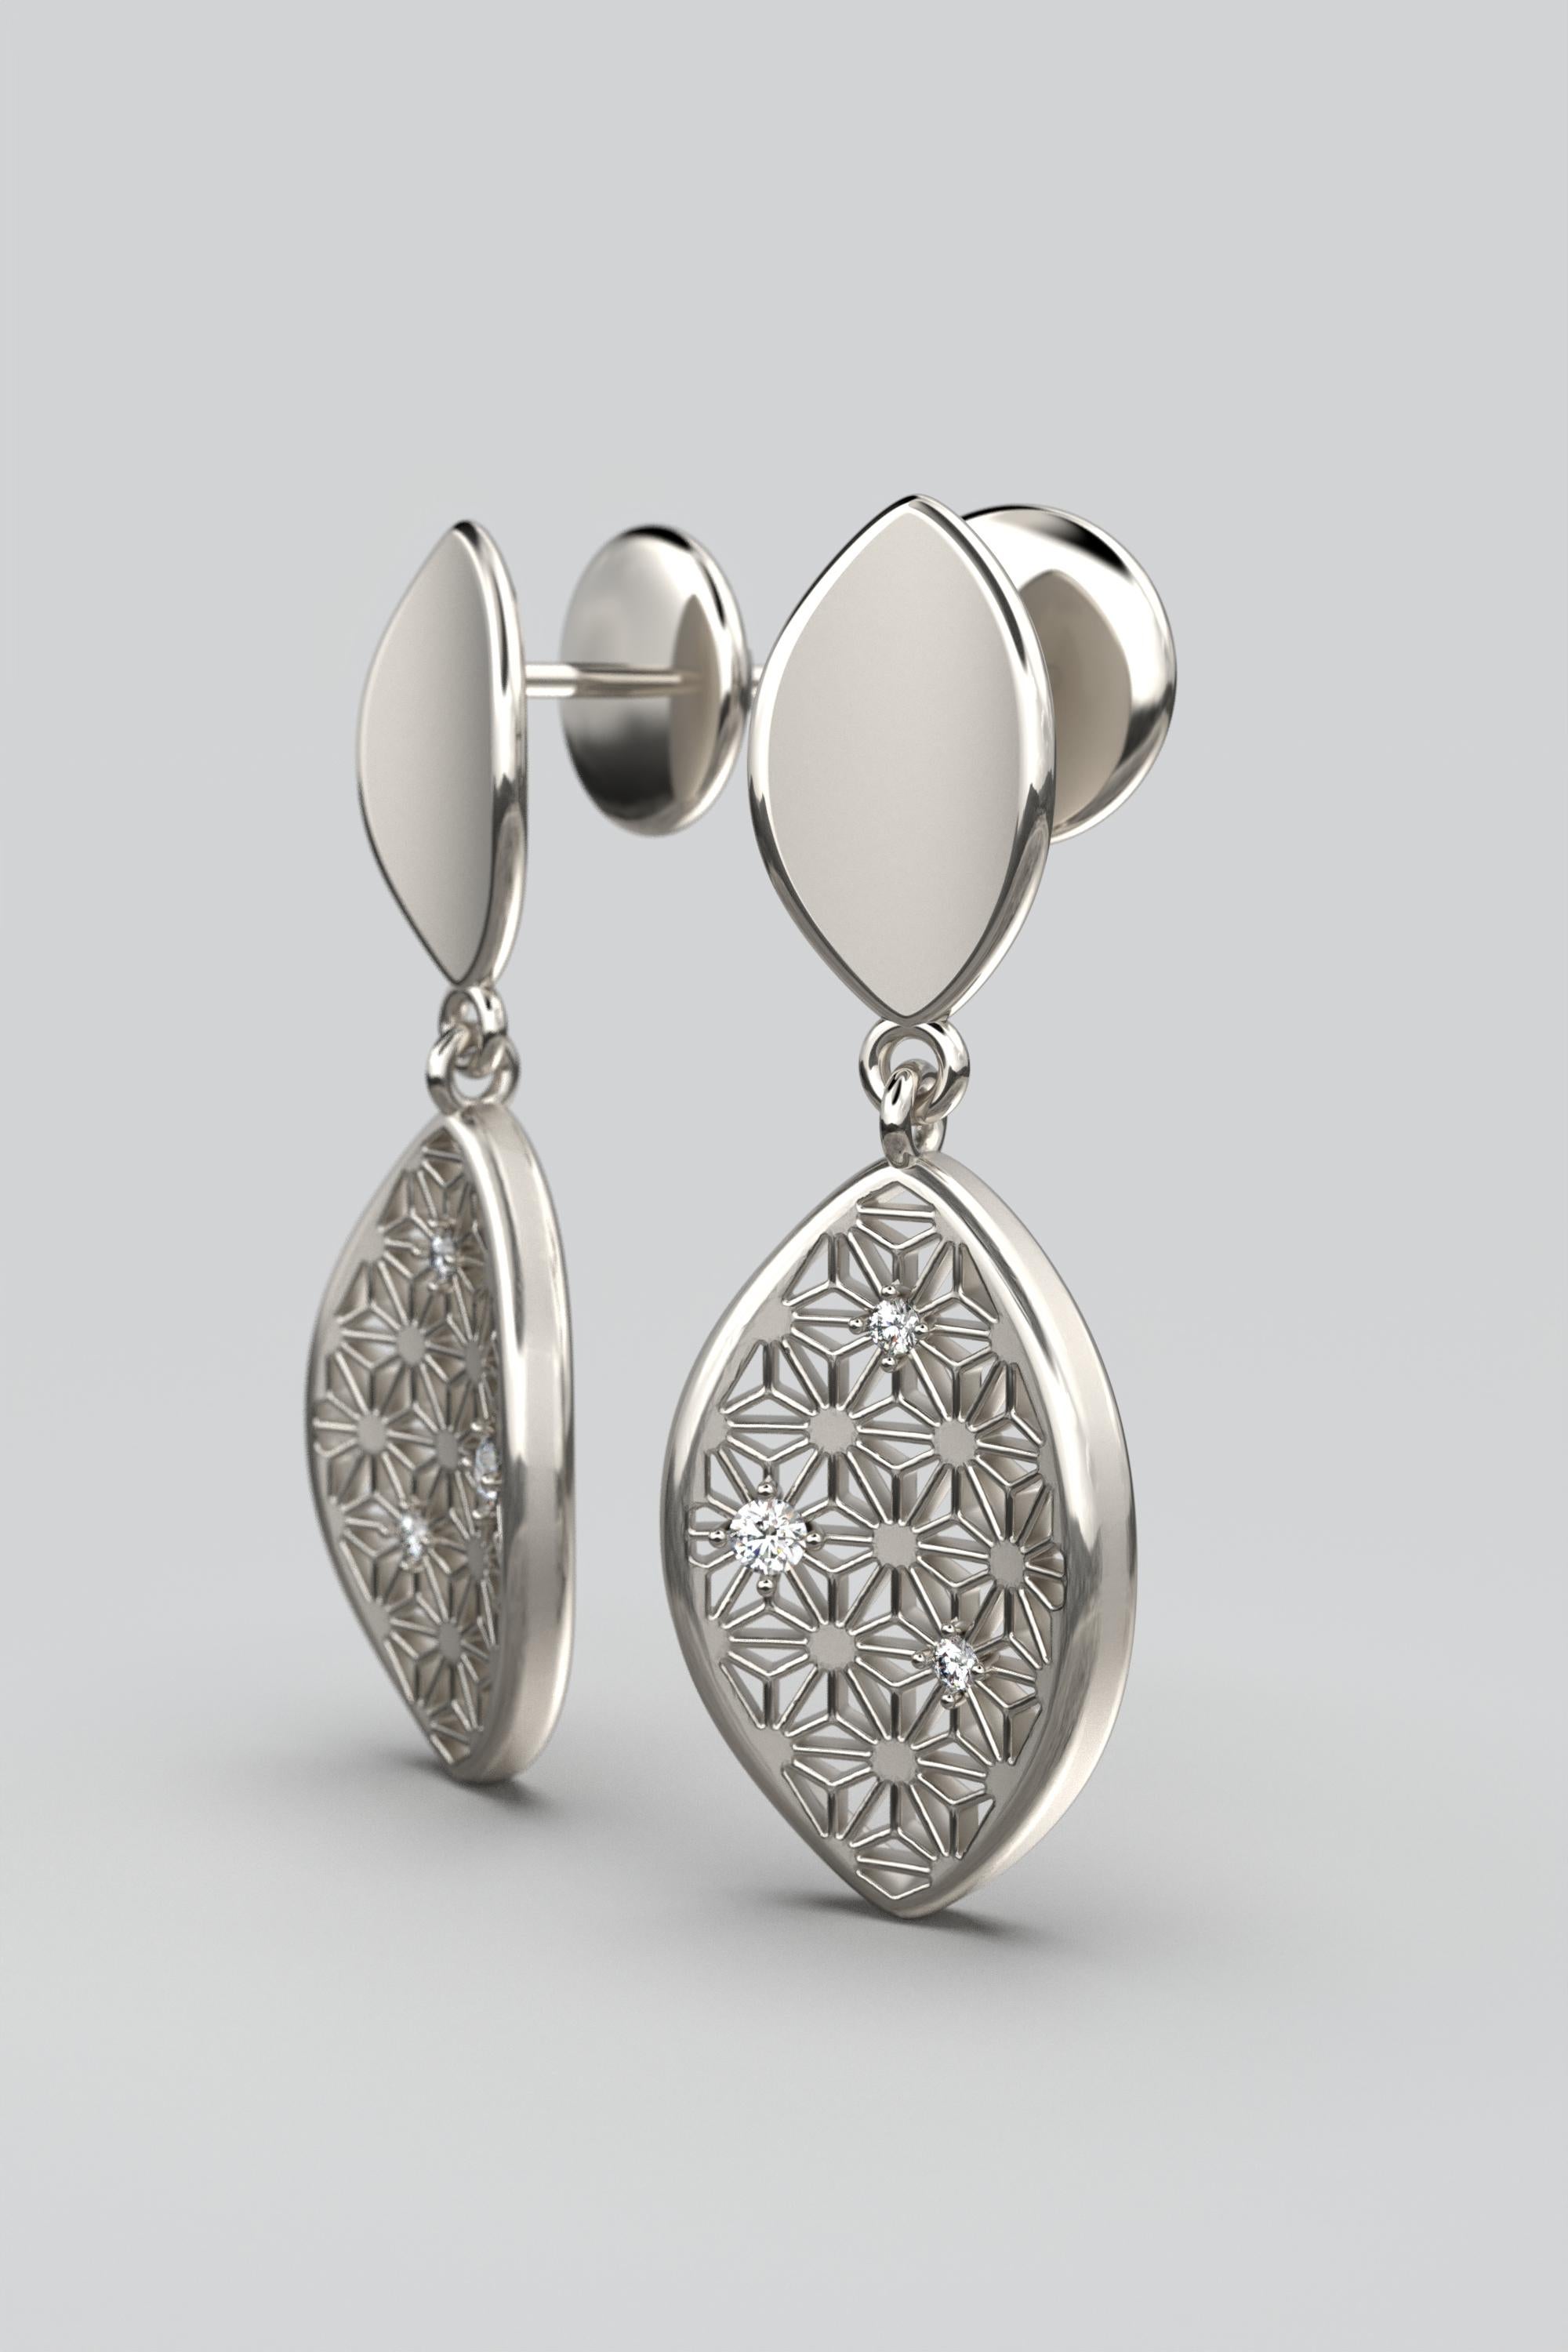 Italian Diamond Earrings in 18k Solid Gold with Japanese Sashiko Pattern For Sale 2